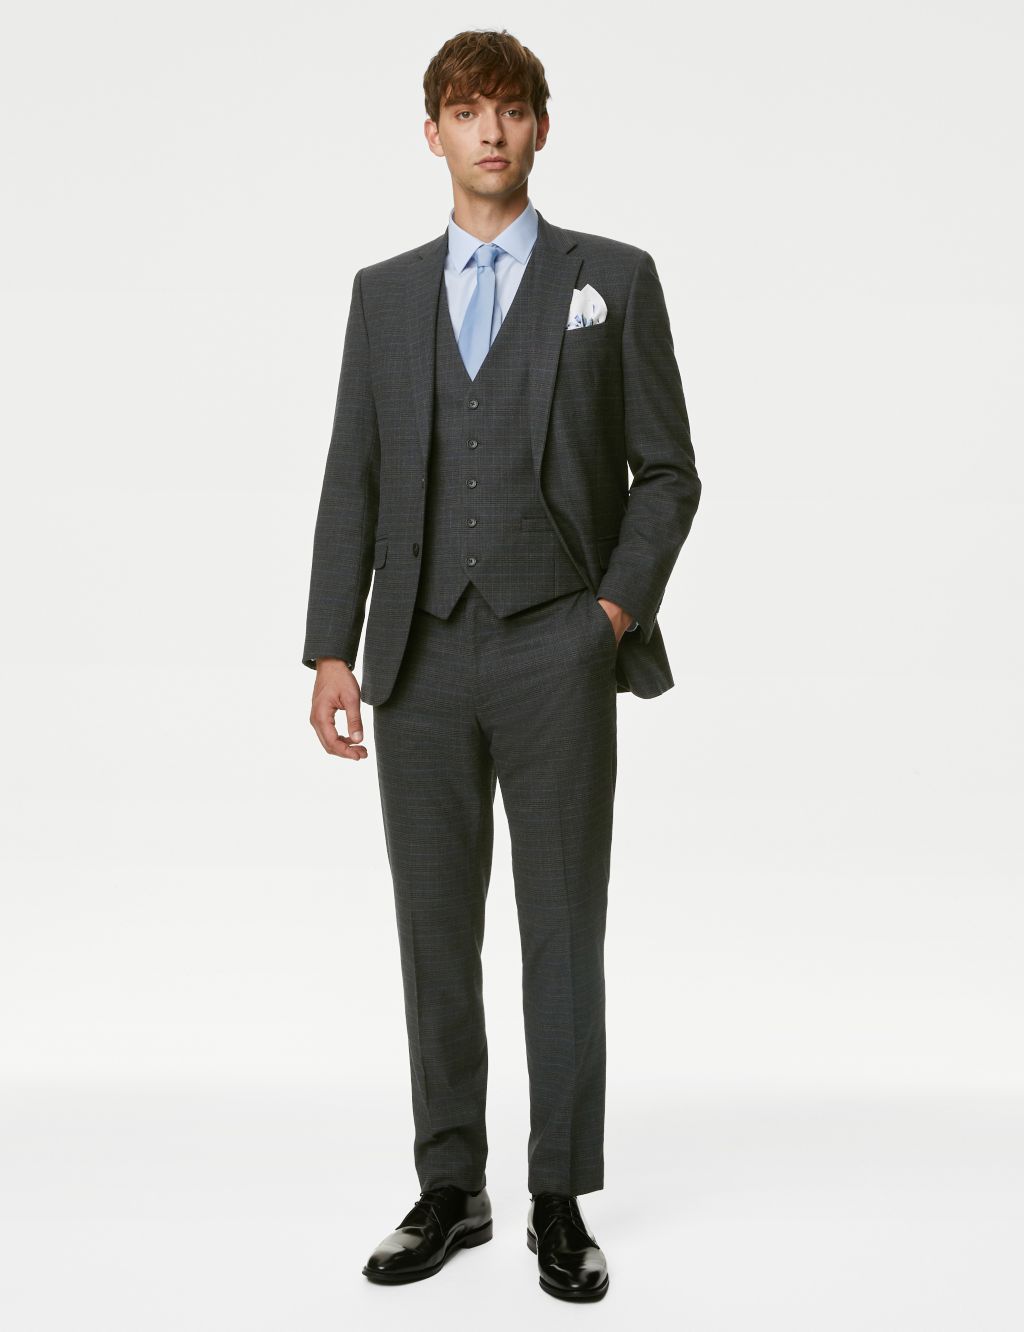 Slim Fit Prince of Wales Check Suit image 6